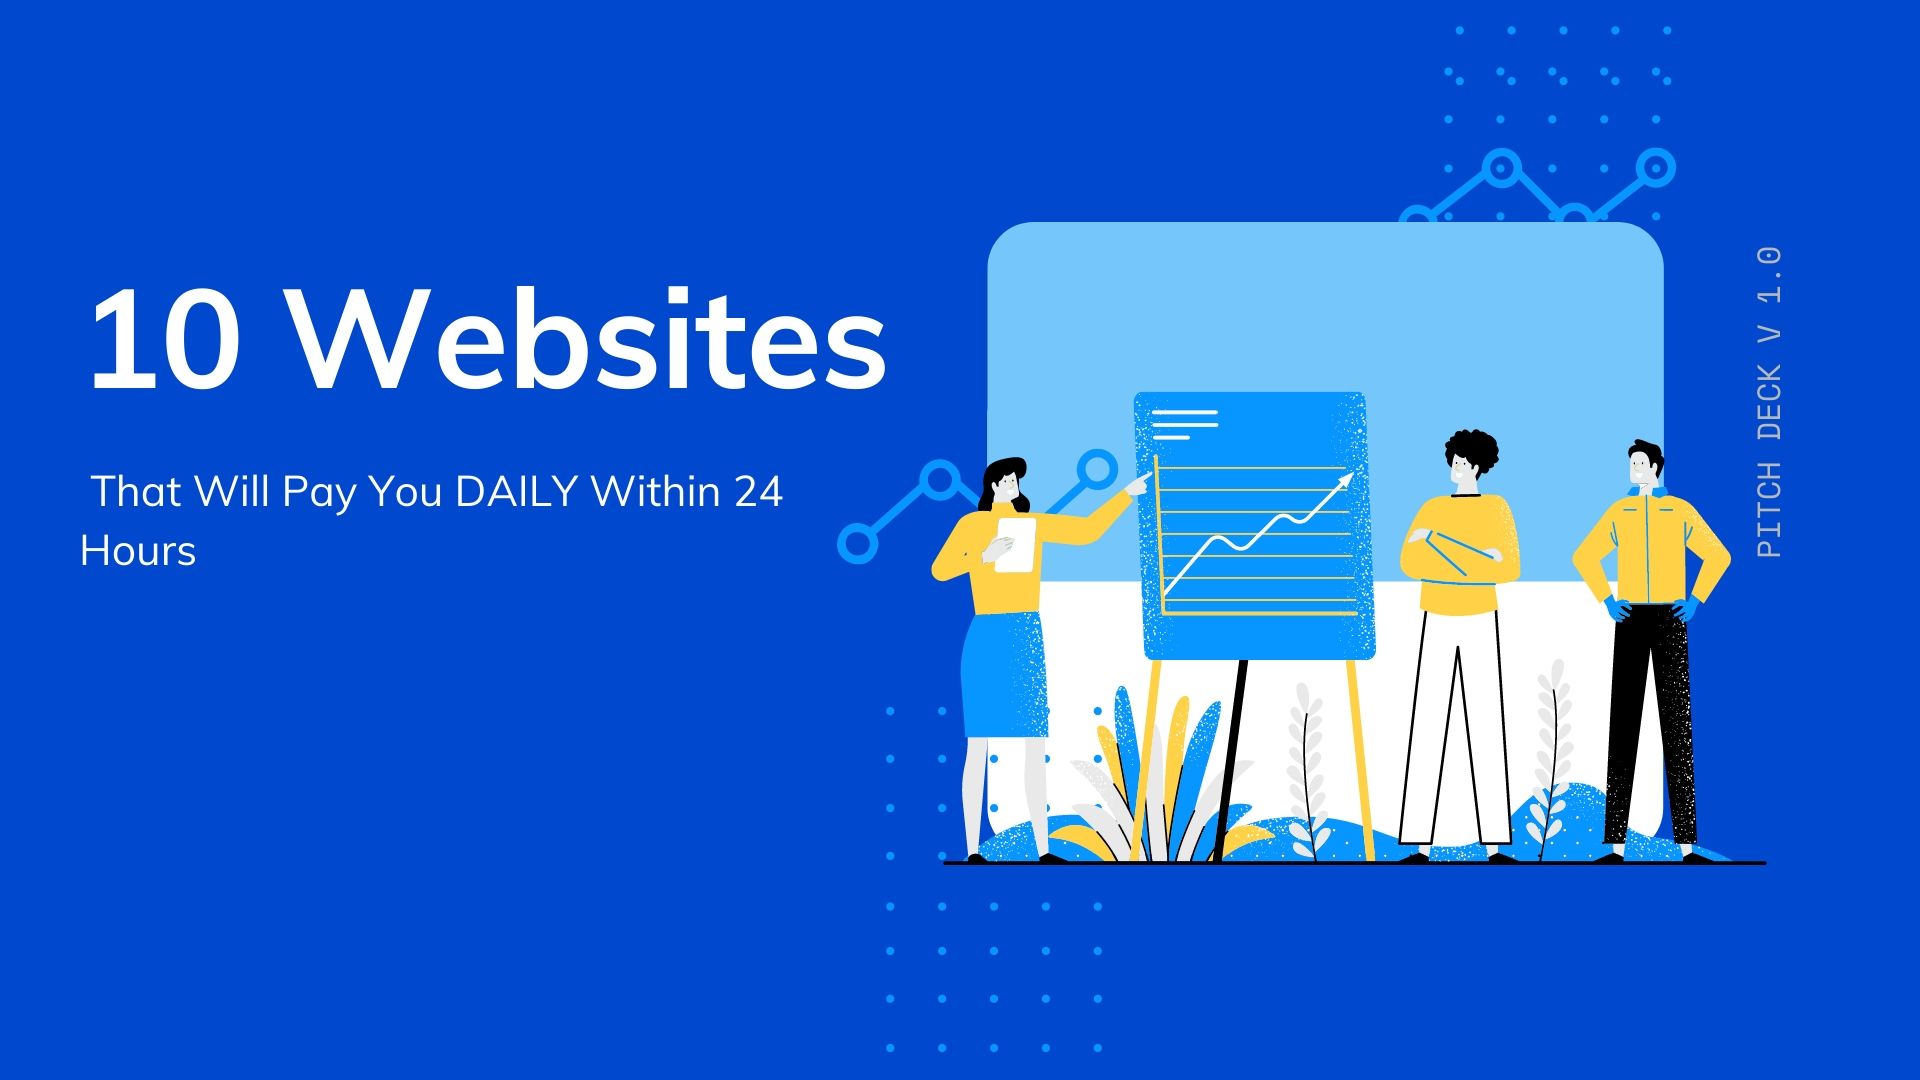 10 Websites That Will Pay You DAILY Within 24 hours